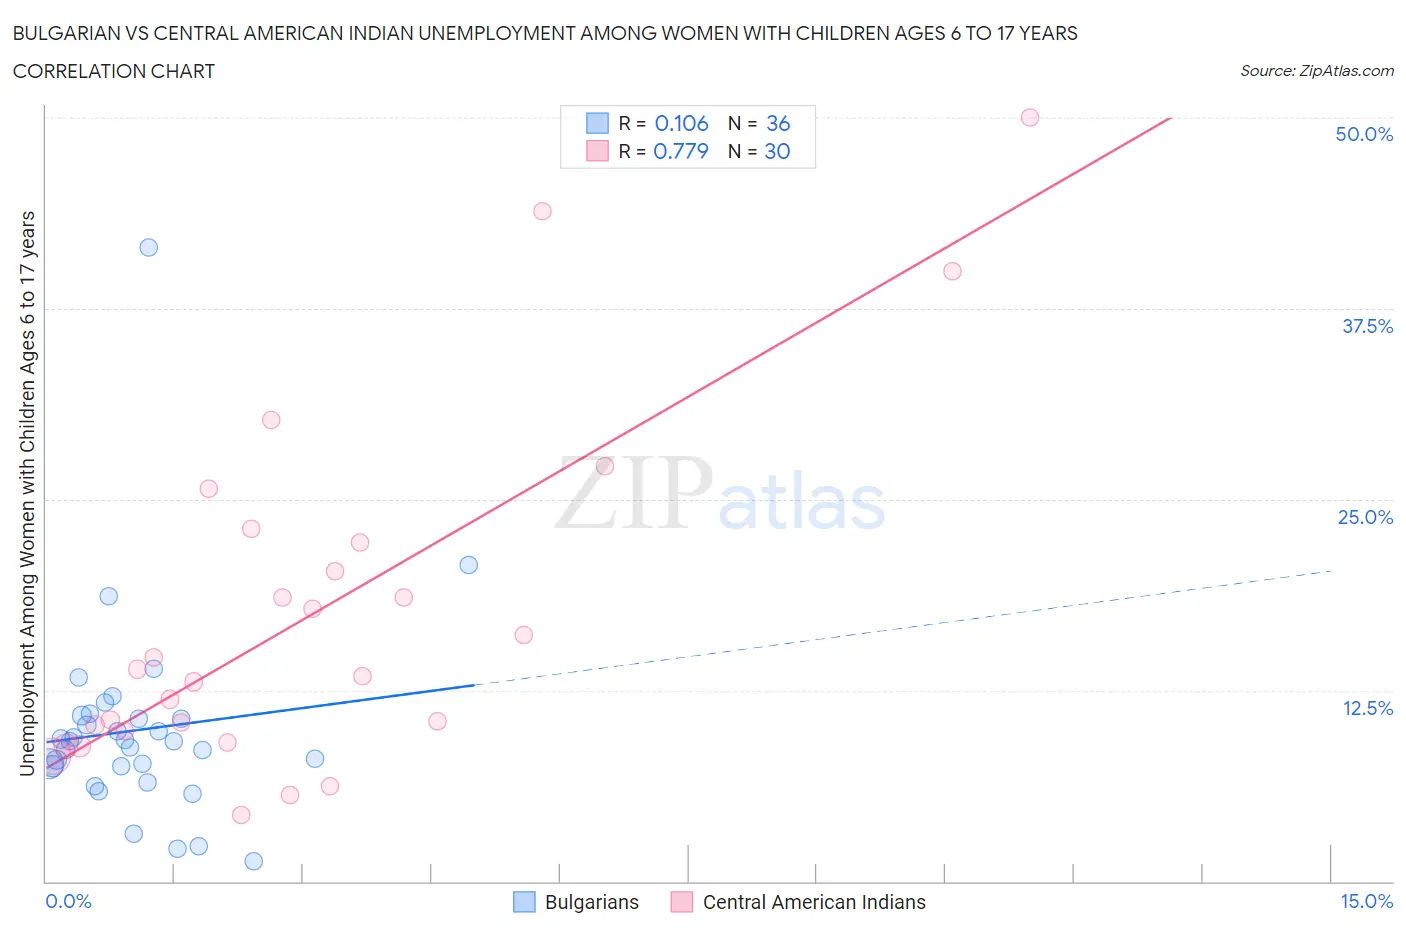 Bulgarian vs Central American Indian Unemployment Among Women with Children Ages 6 to 17 years